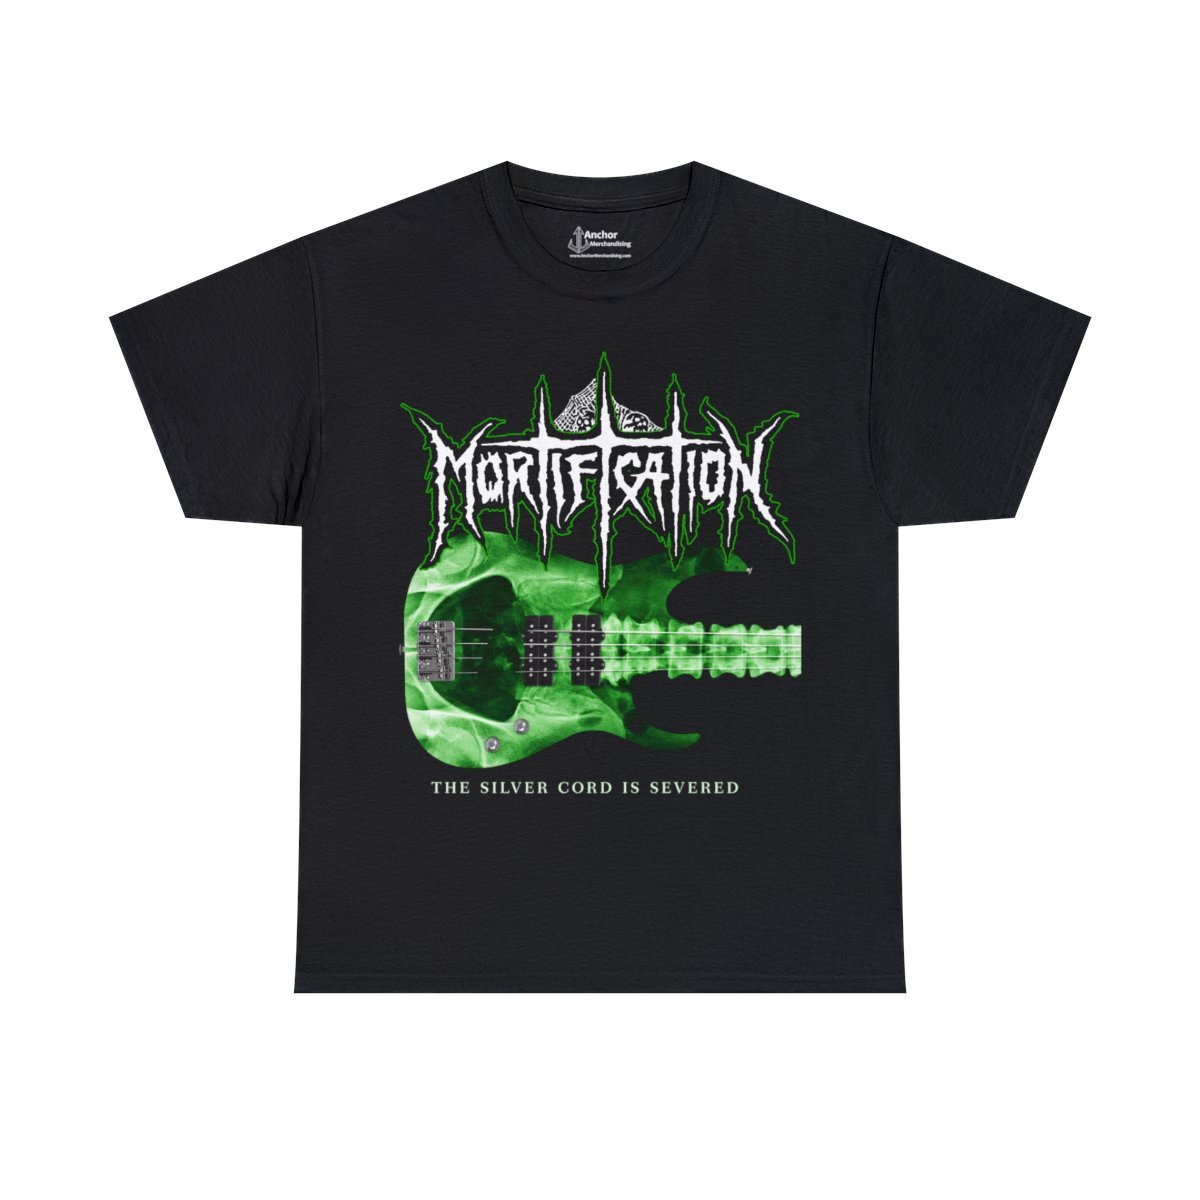 Mortification – The Silver Cord is Severed 2021 Short Sleeve Tshirt